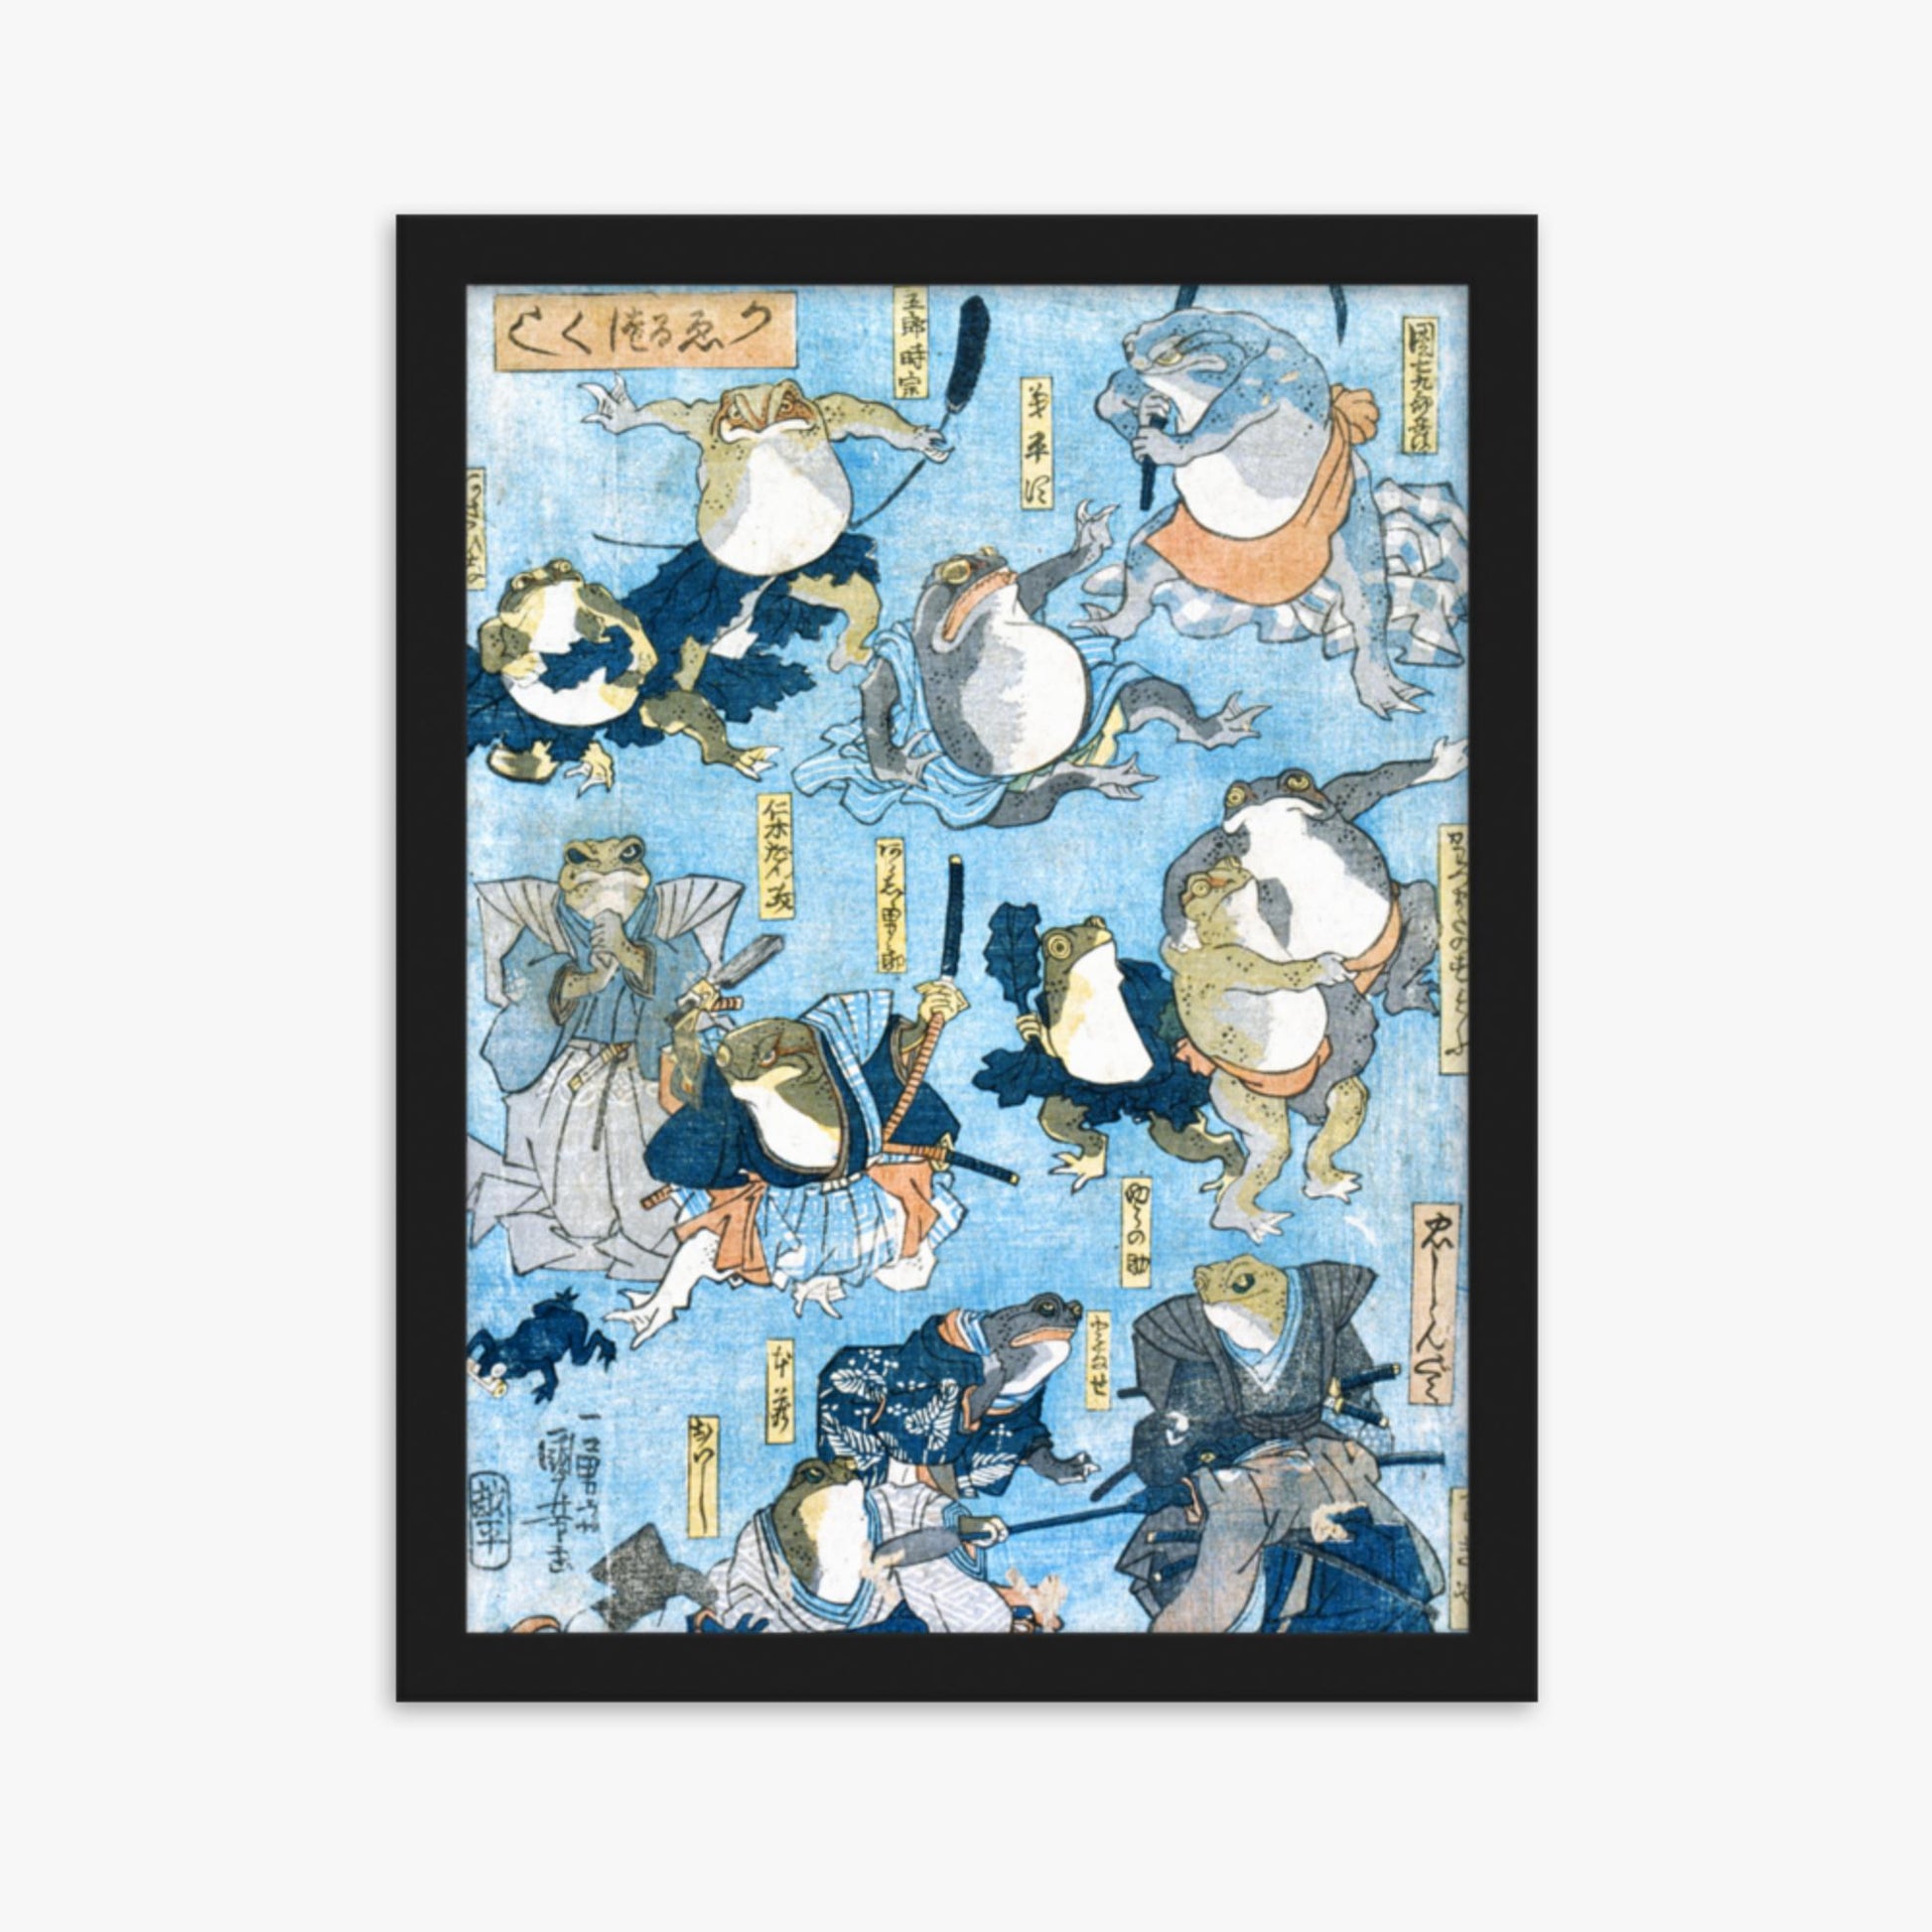 Utagawa Kuniyoshi - Famous Heroes of the Kabuki Stage Played by Frogs  30x40 cm Poster With Black Frame